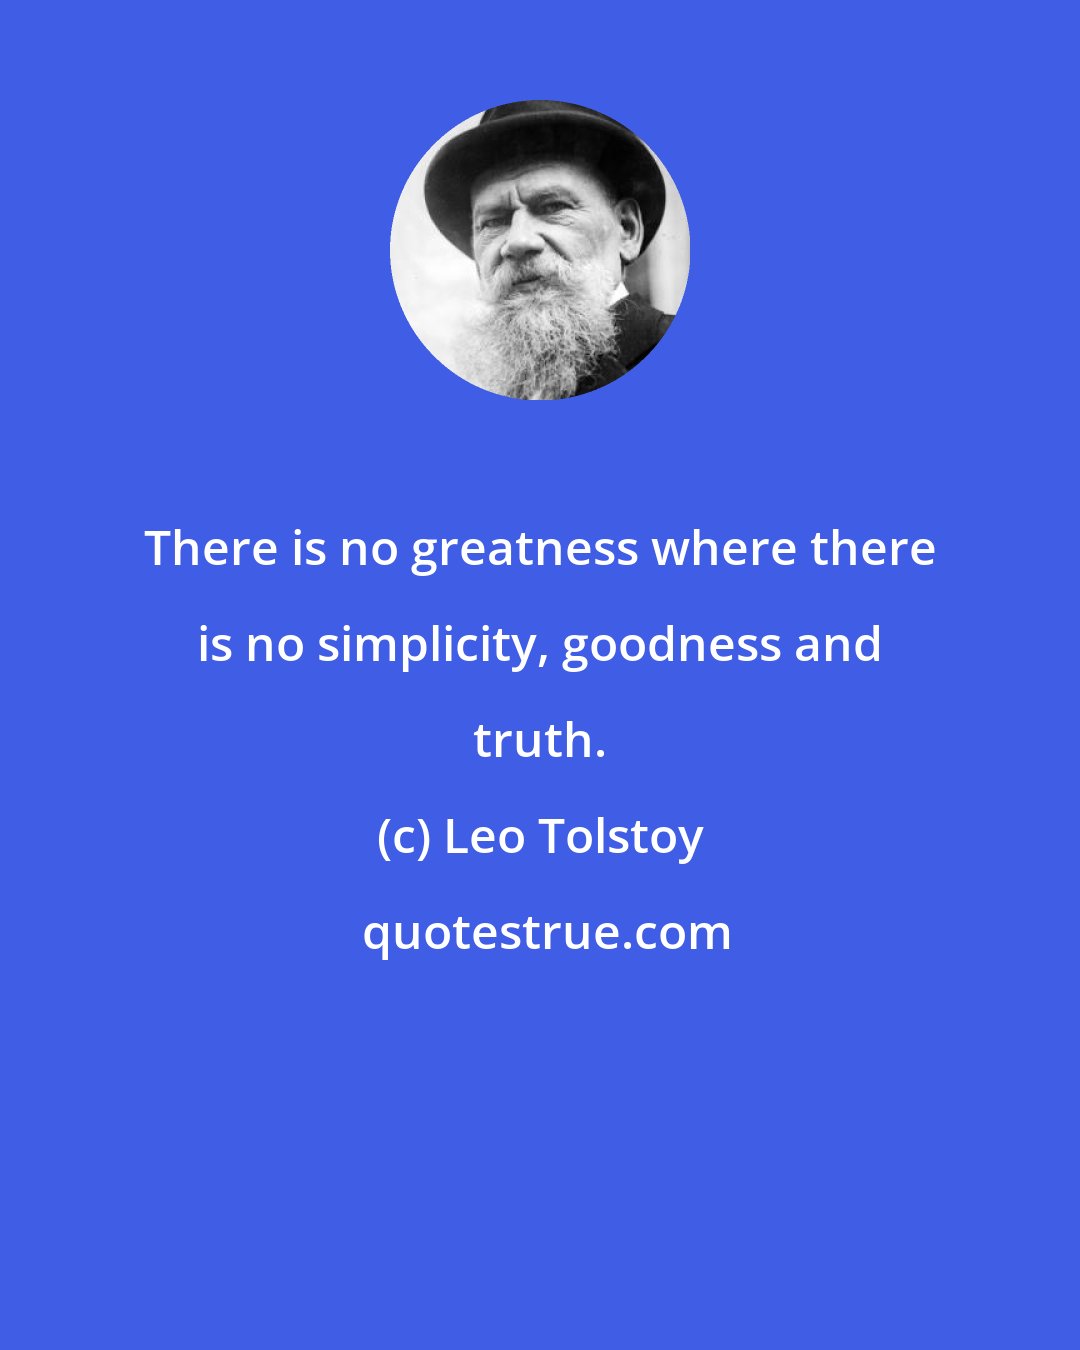 Leo Tolstoy: There is no greatness where there is no simplicity, goodness and truth.